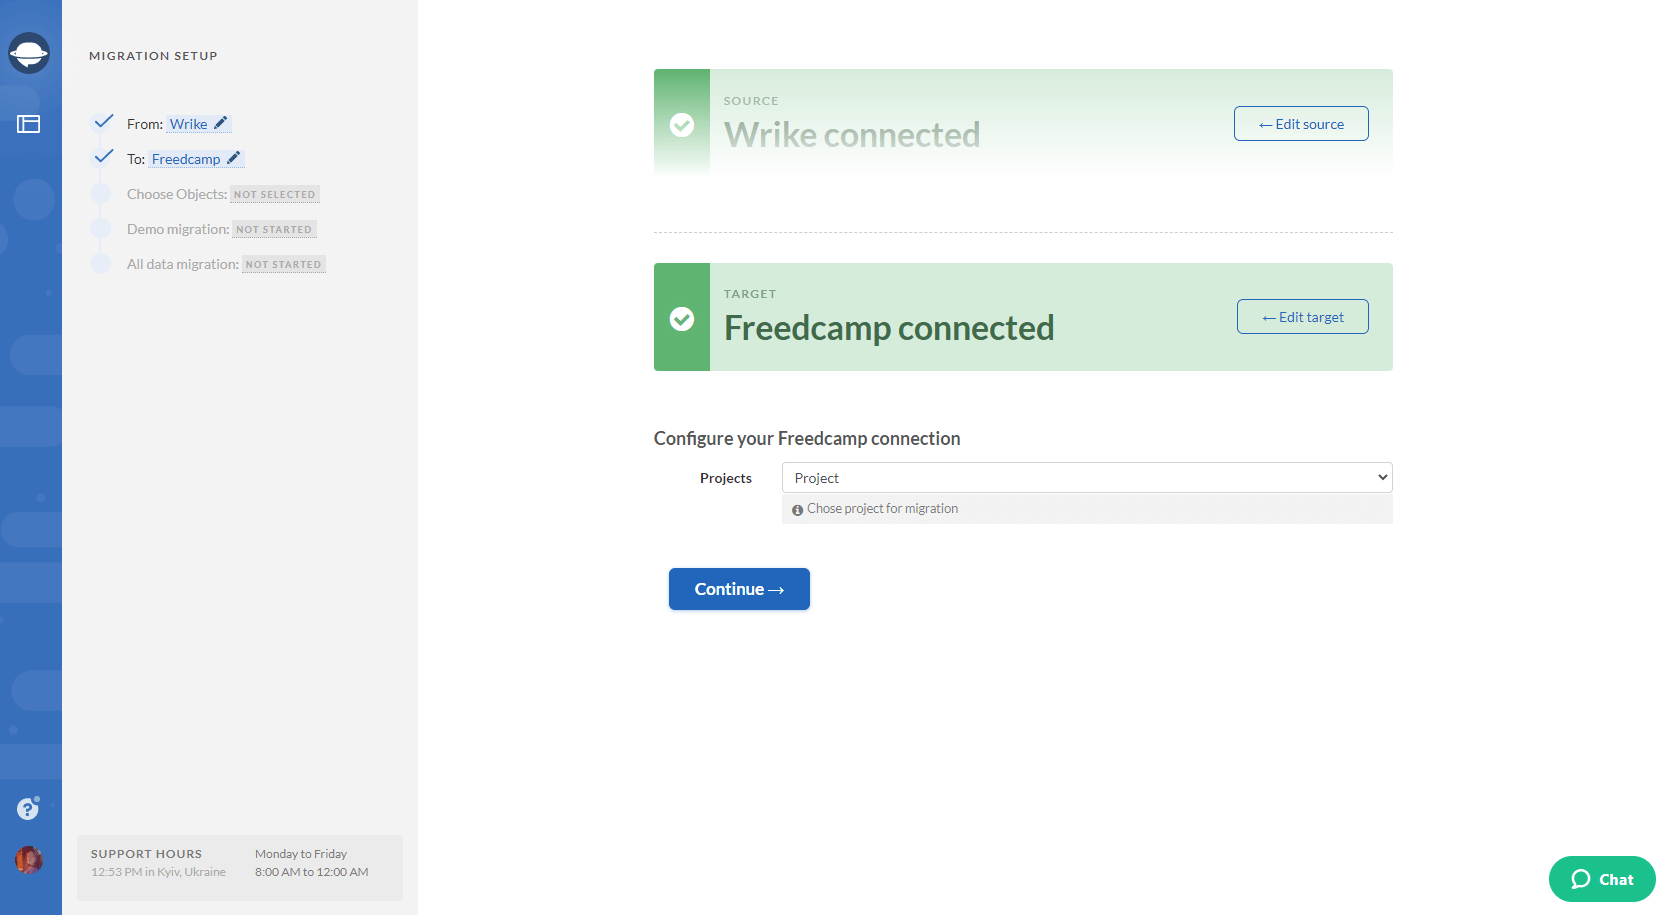 Completing Freedcamp Connection